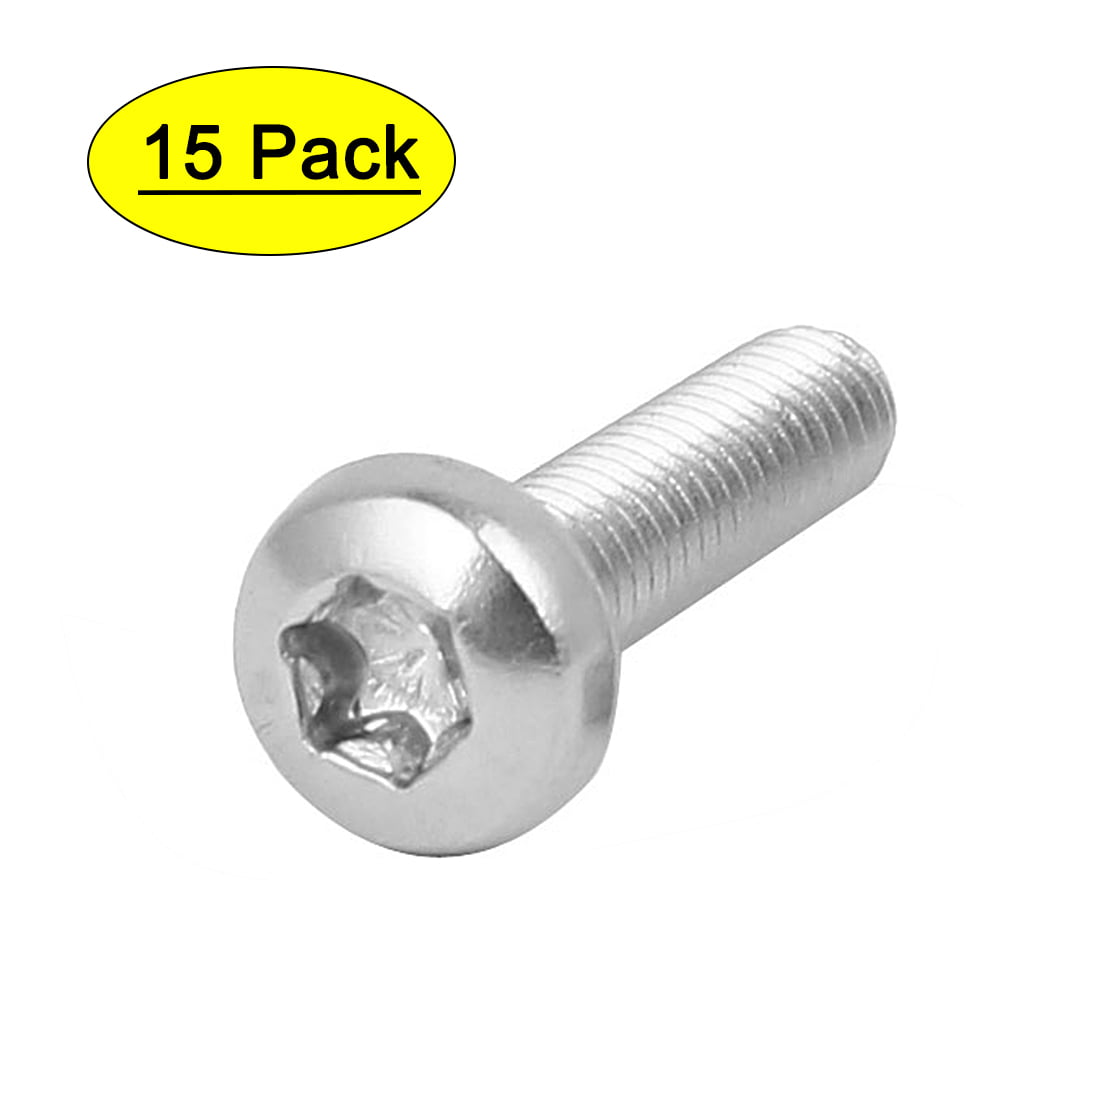 M4x16mm Thread 316 Stainless Steel Truss Phillips Head Self Tapping Screw 15pcs